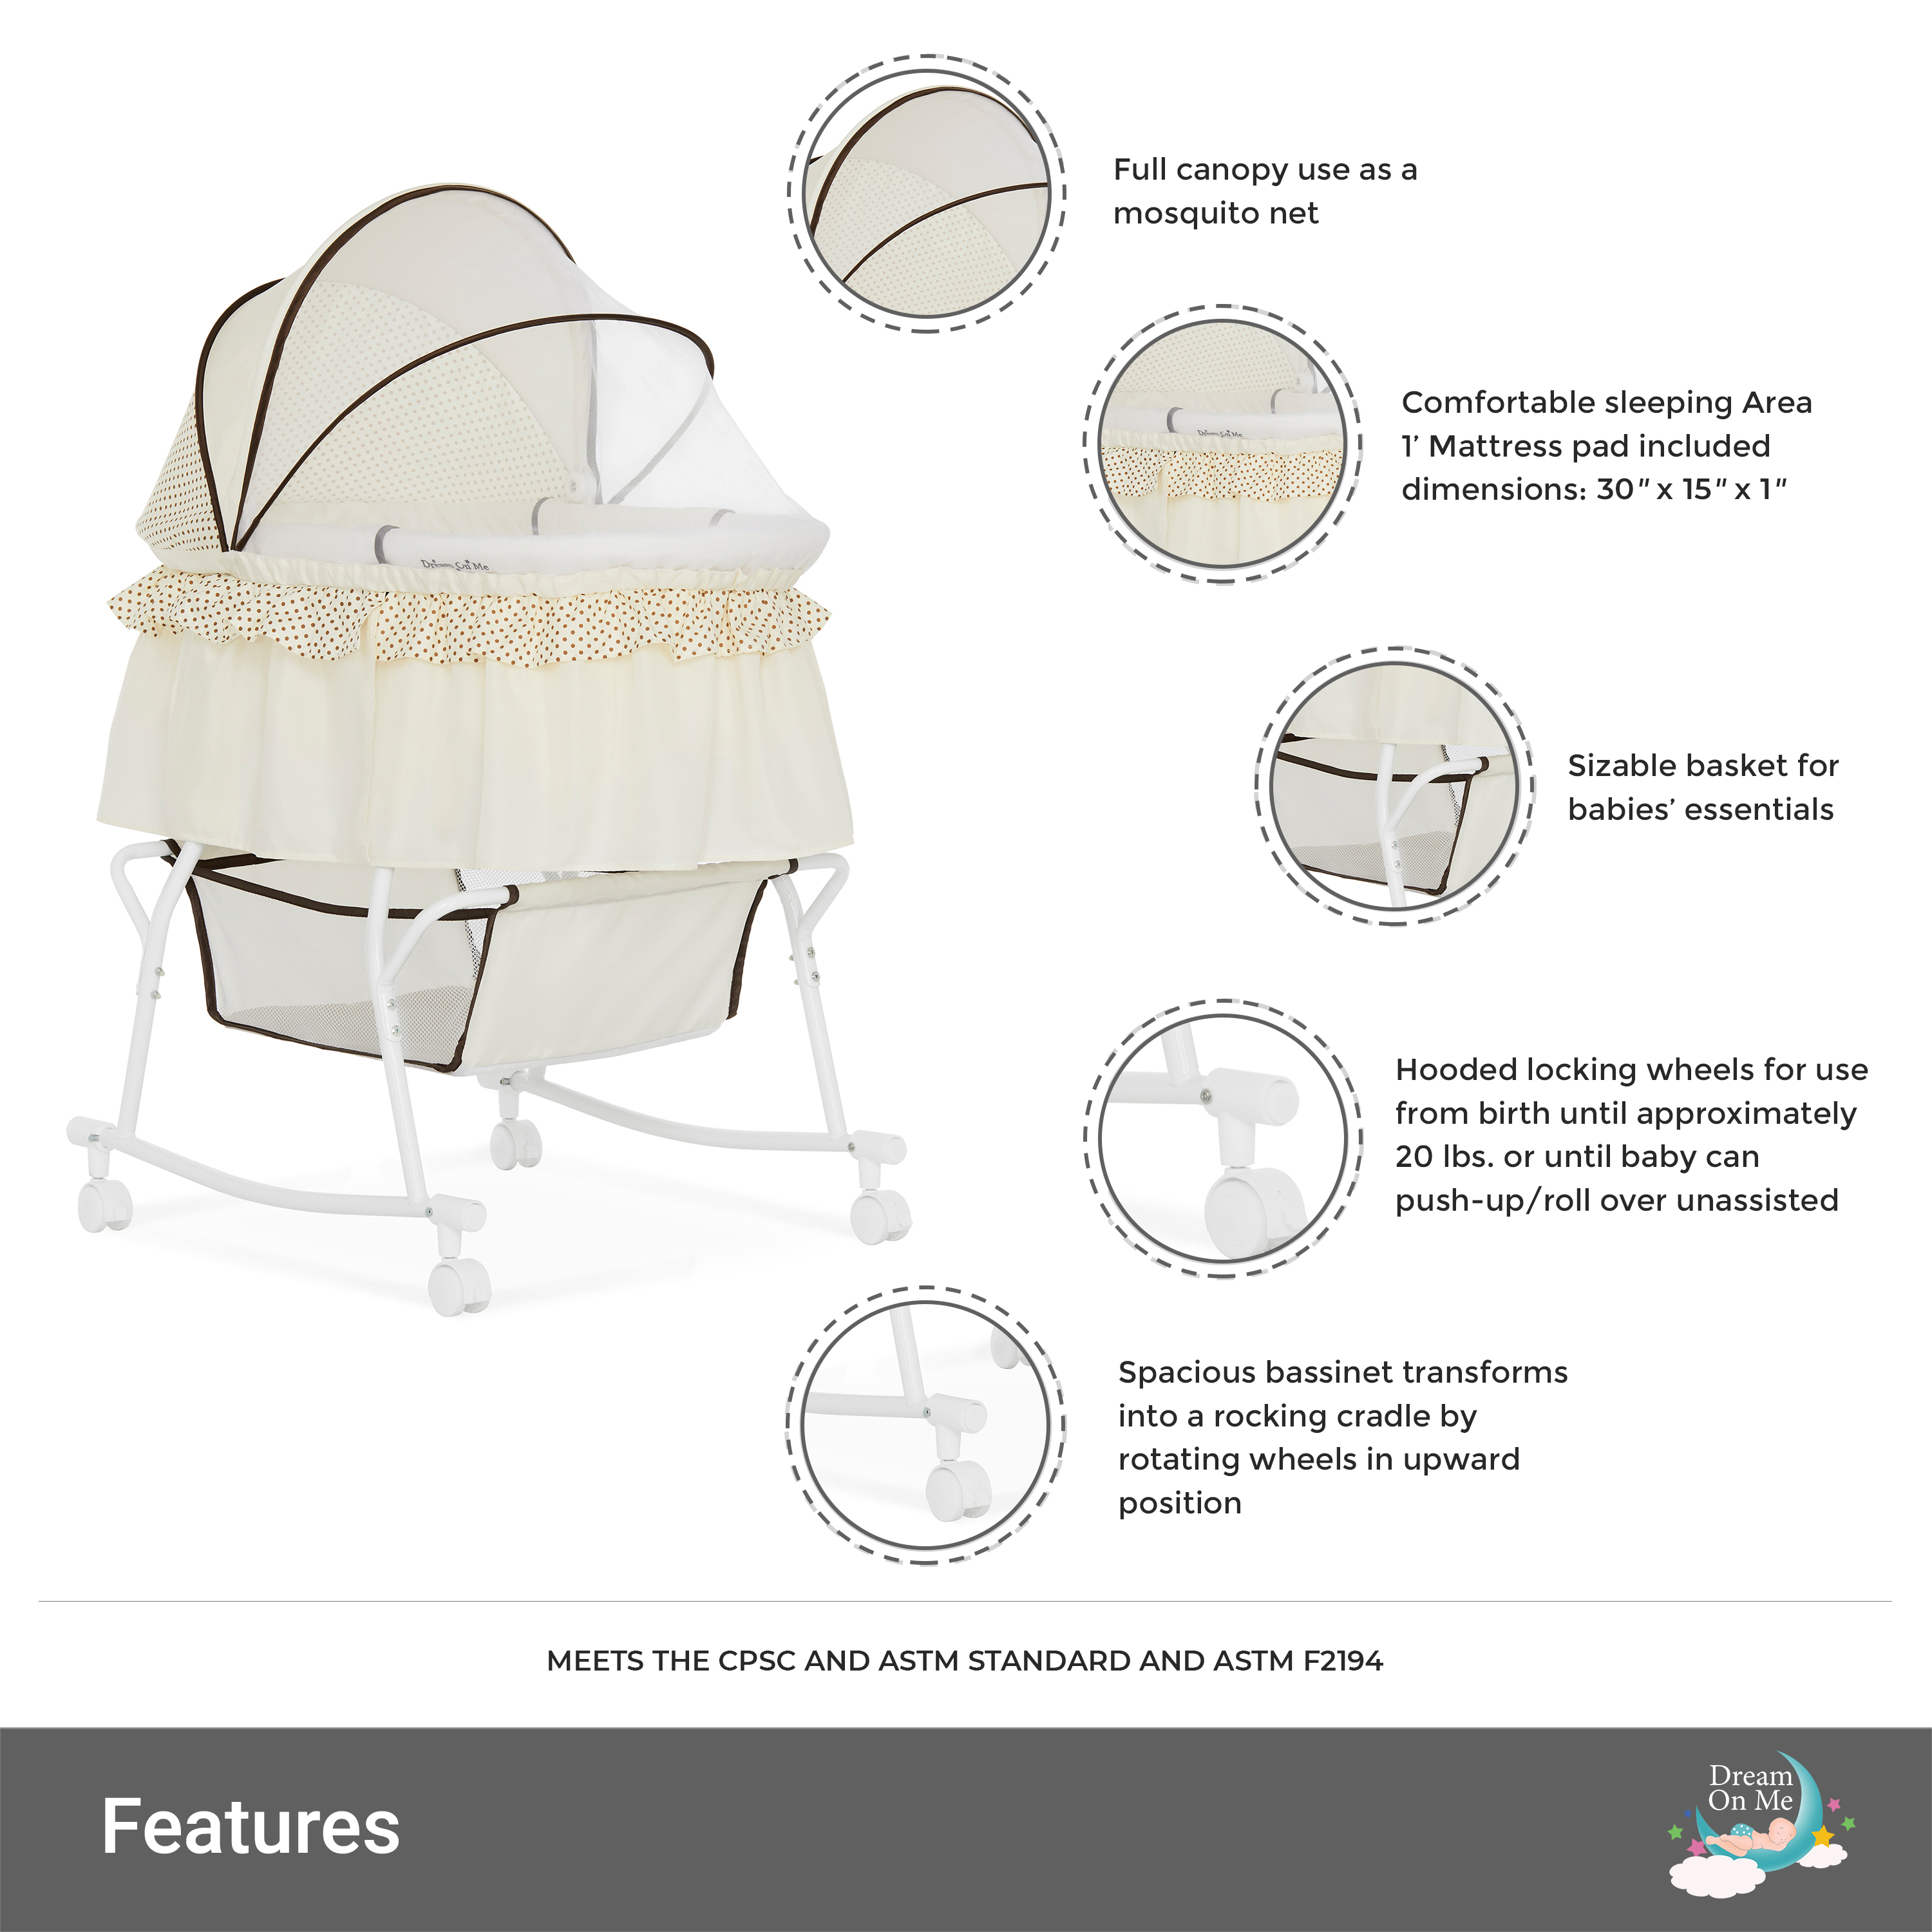 Dream On Me Lacy Portable 2-in-1 Bassinet & Cradle in Cream, Lightweight Baby Bassinet - image 2 of 27